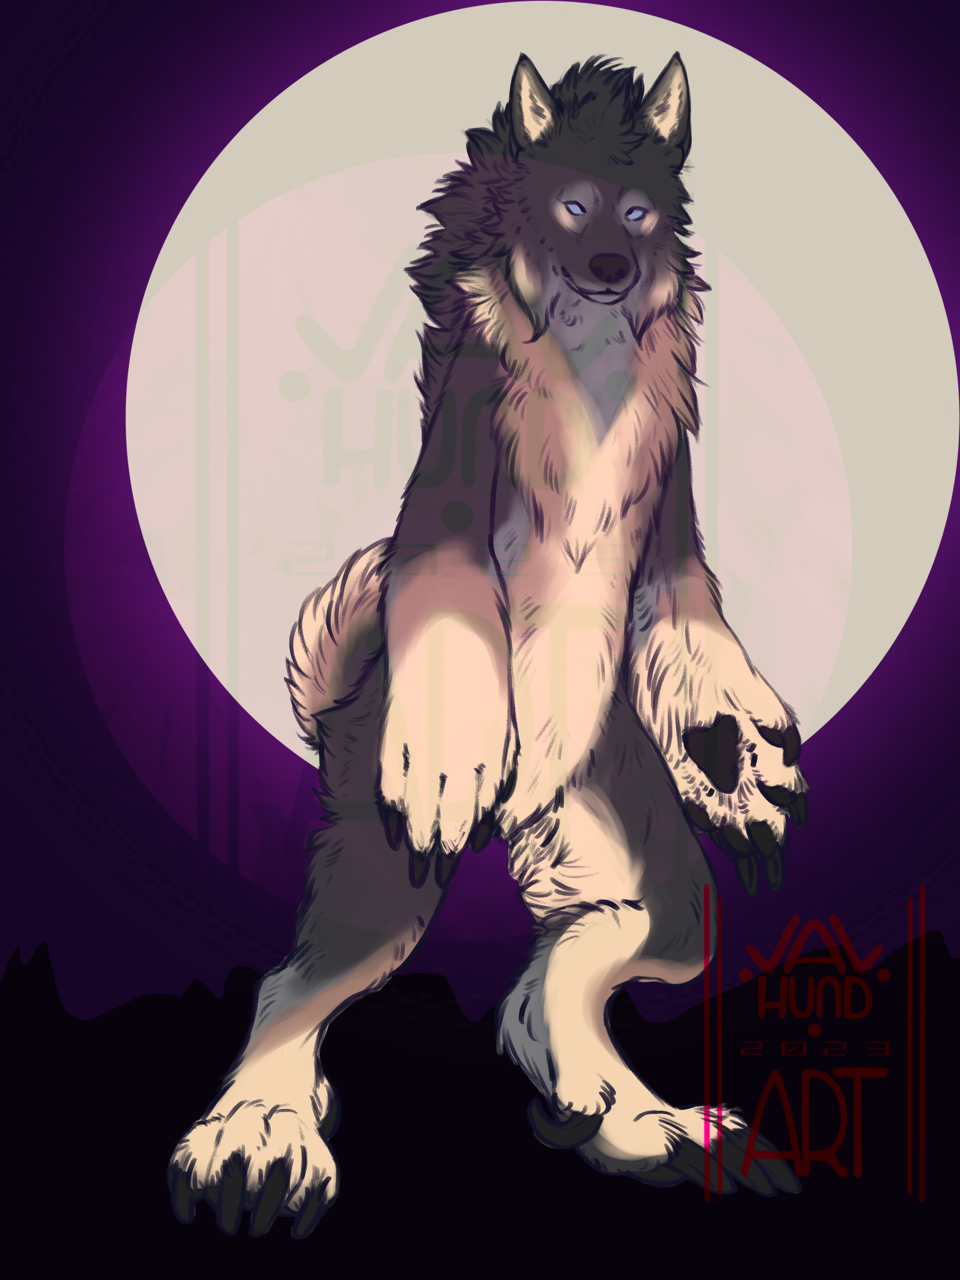 A werewolf kind of creature with a lot of fluff standing in front of a bright round shape resembling the moon. 